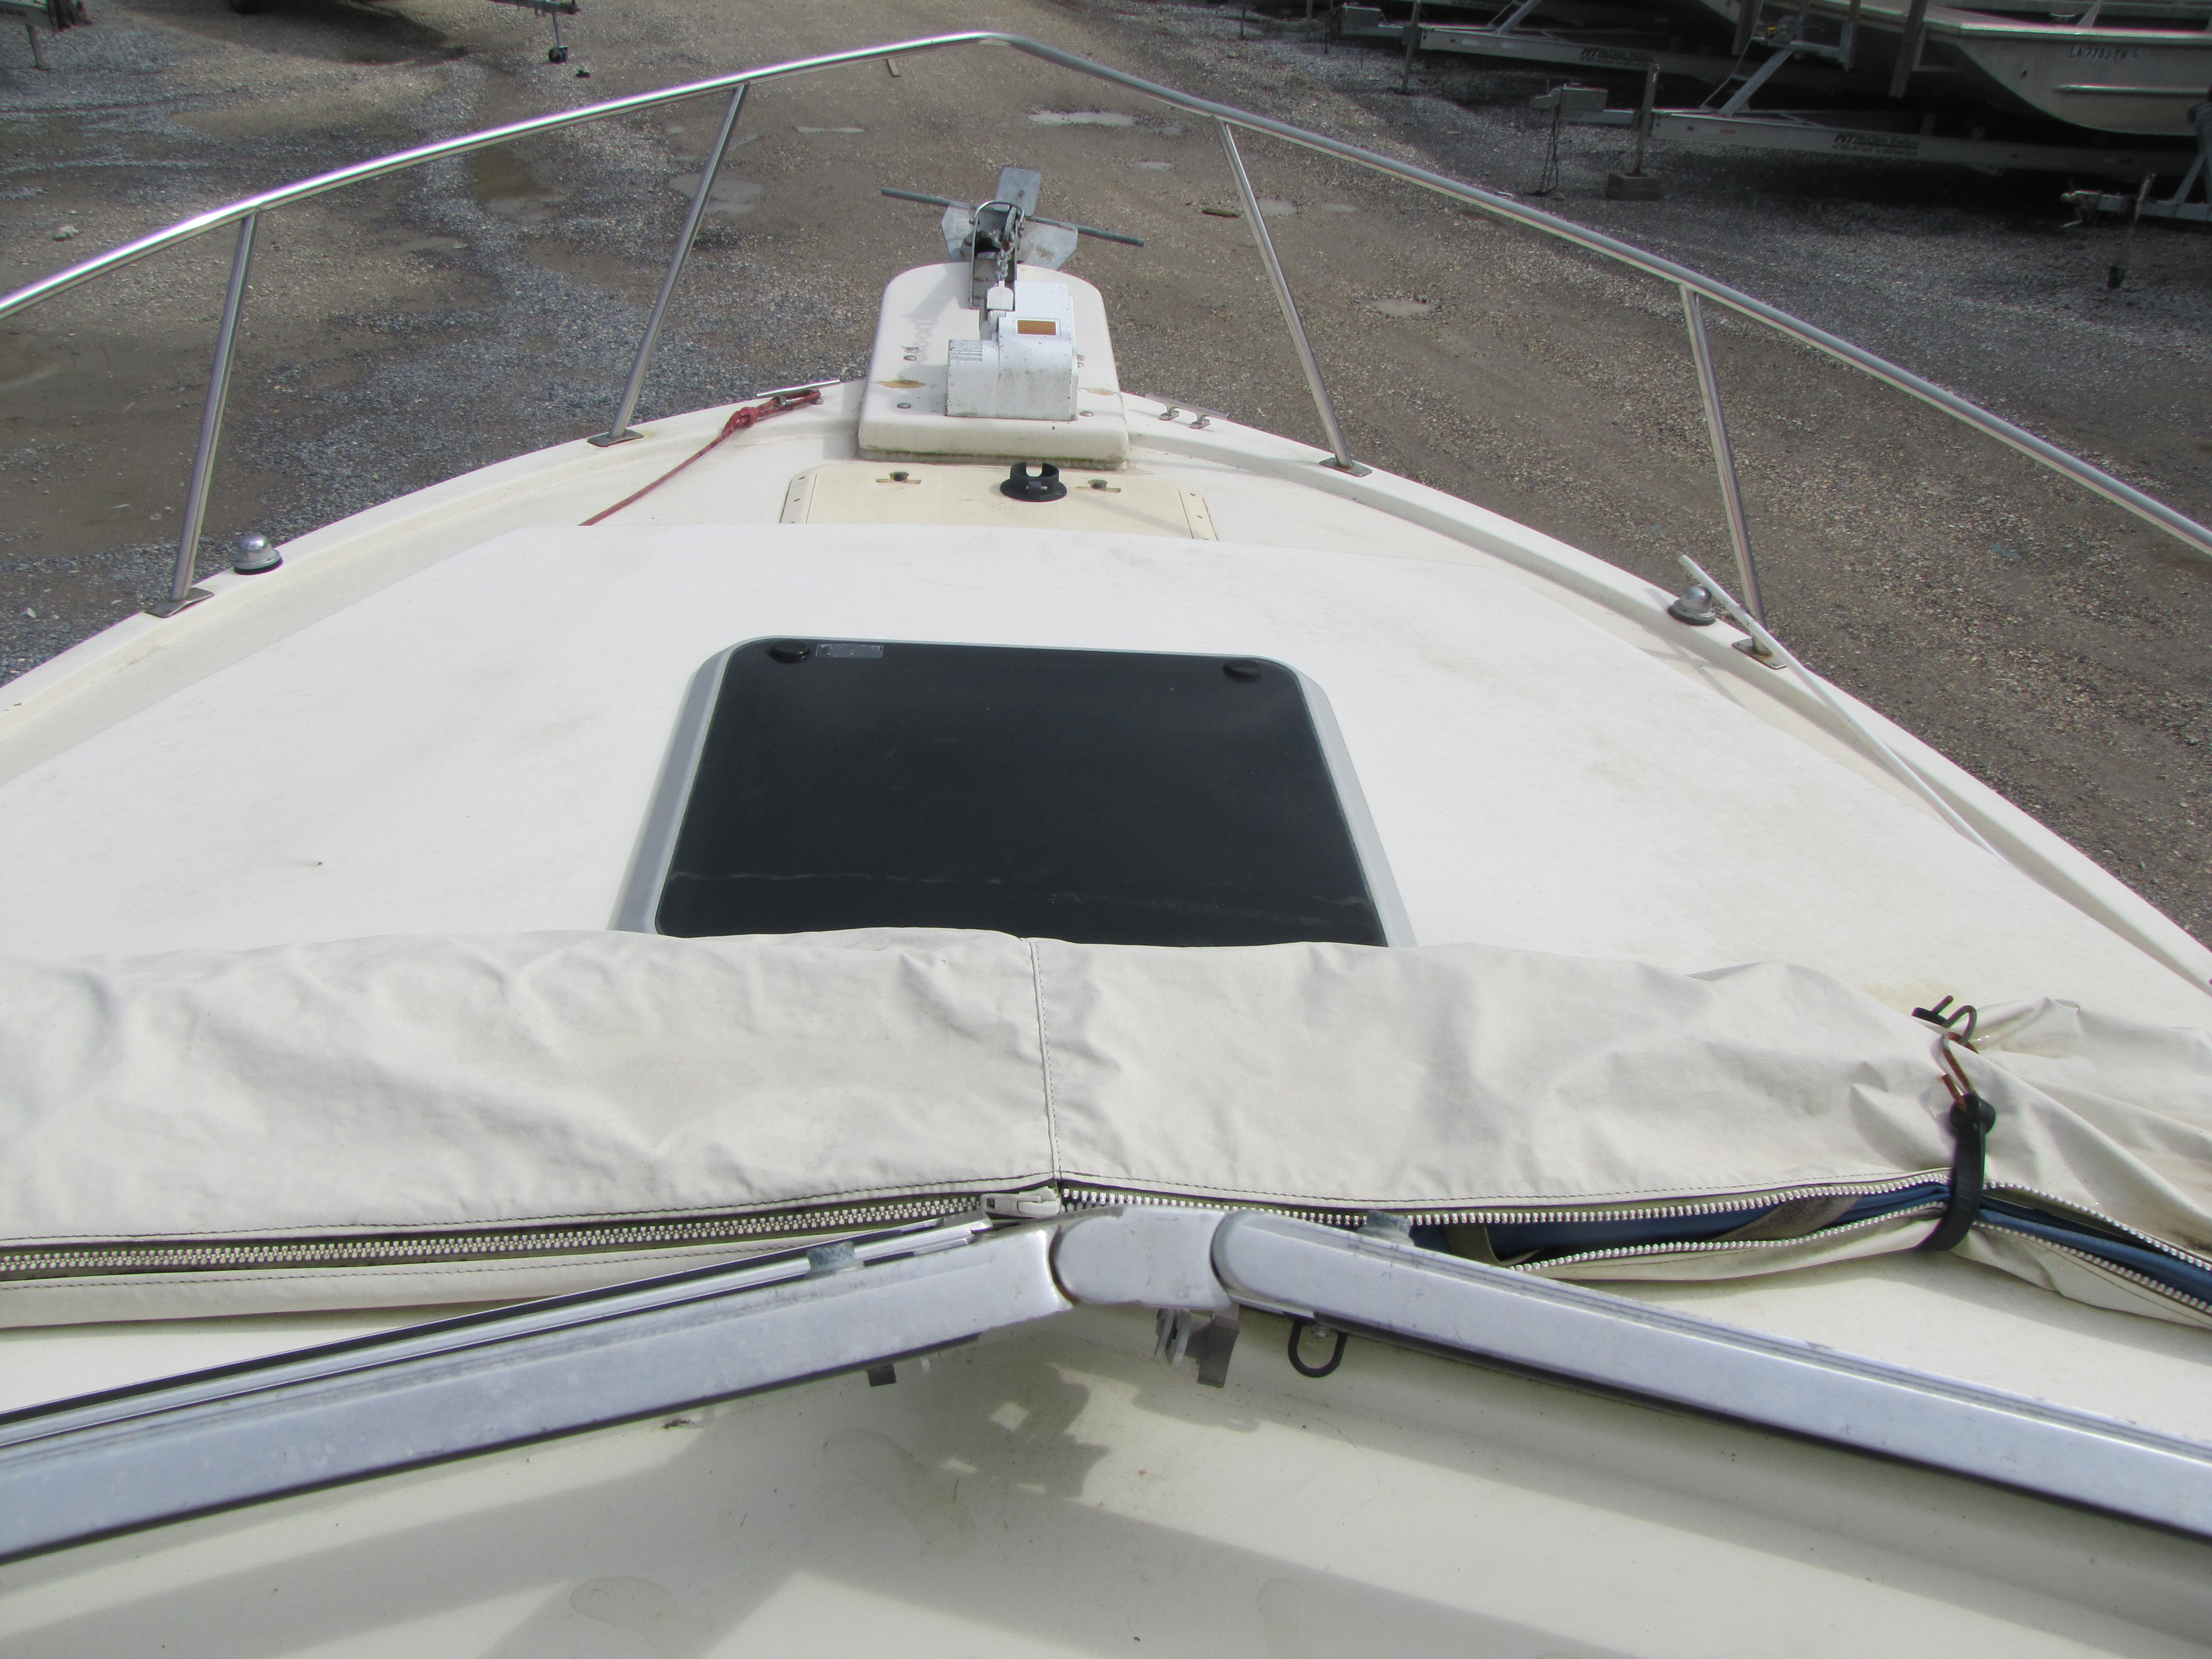 1993 Glen Young boat for sale, model of the boat is 270 & Image # 13 of 16